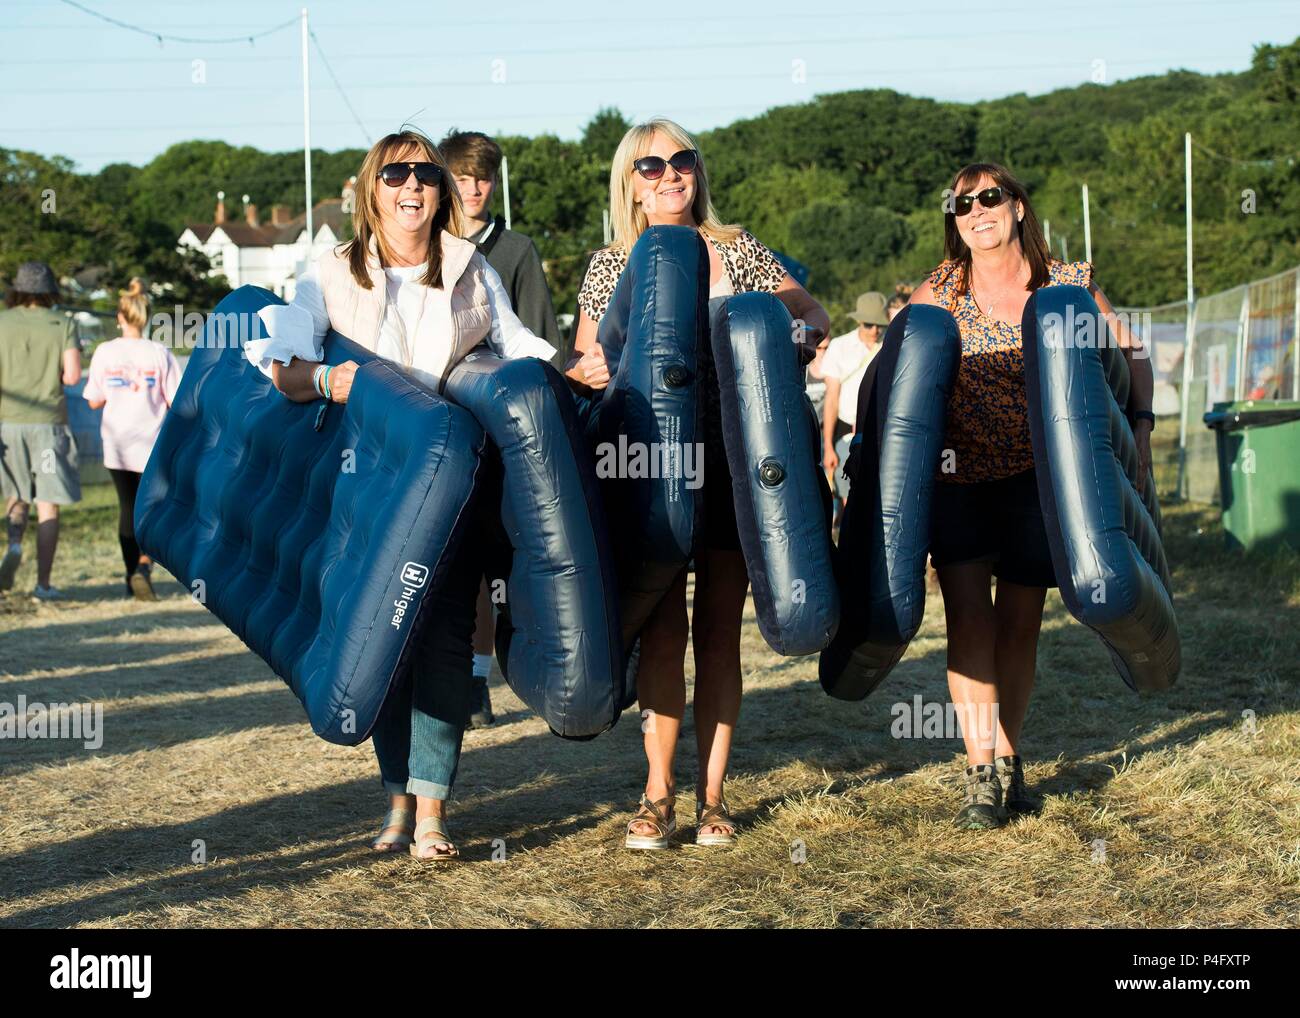 Heather Dockerty, April Beggs and Lorraine McAlister from Northern Ireland carry airbeds on site at the Isle of Wight festival at Seaclose Park, Newport. Stock Photo